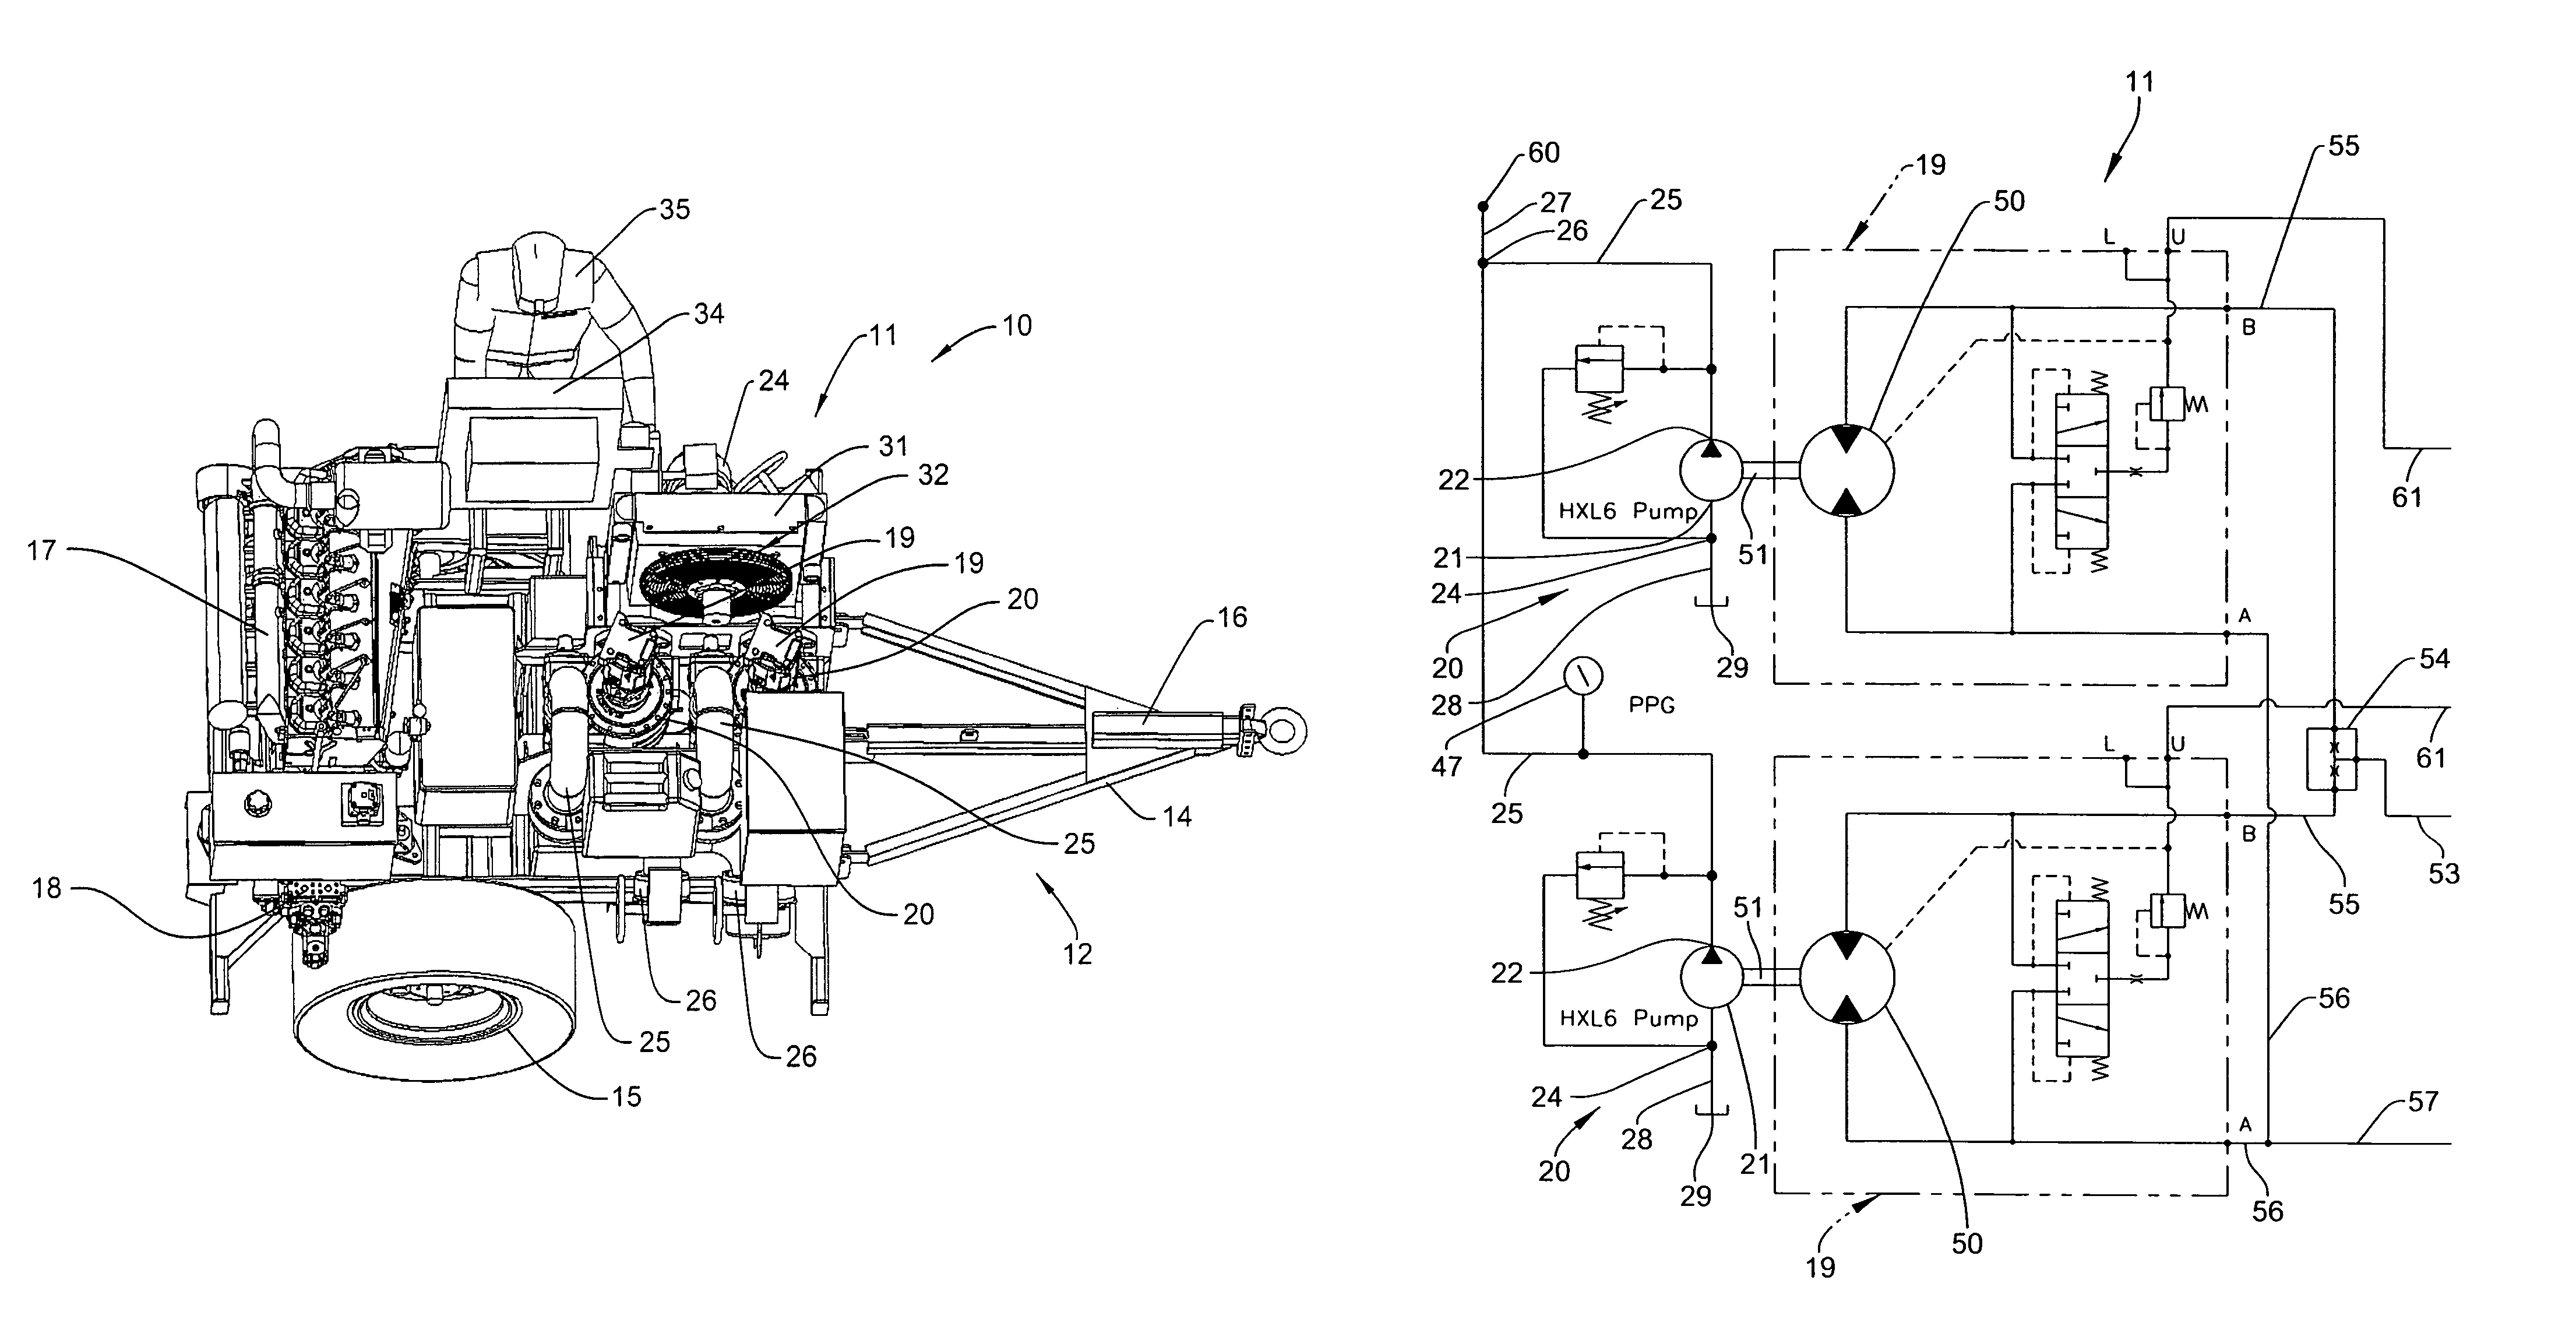 Hydraulic drive and control system for pumps using a charge pump